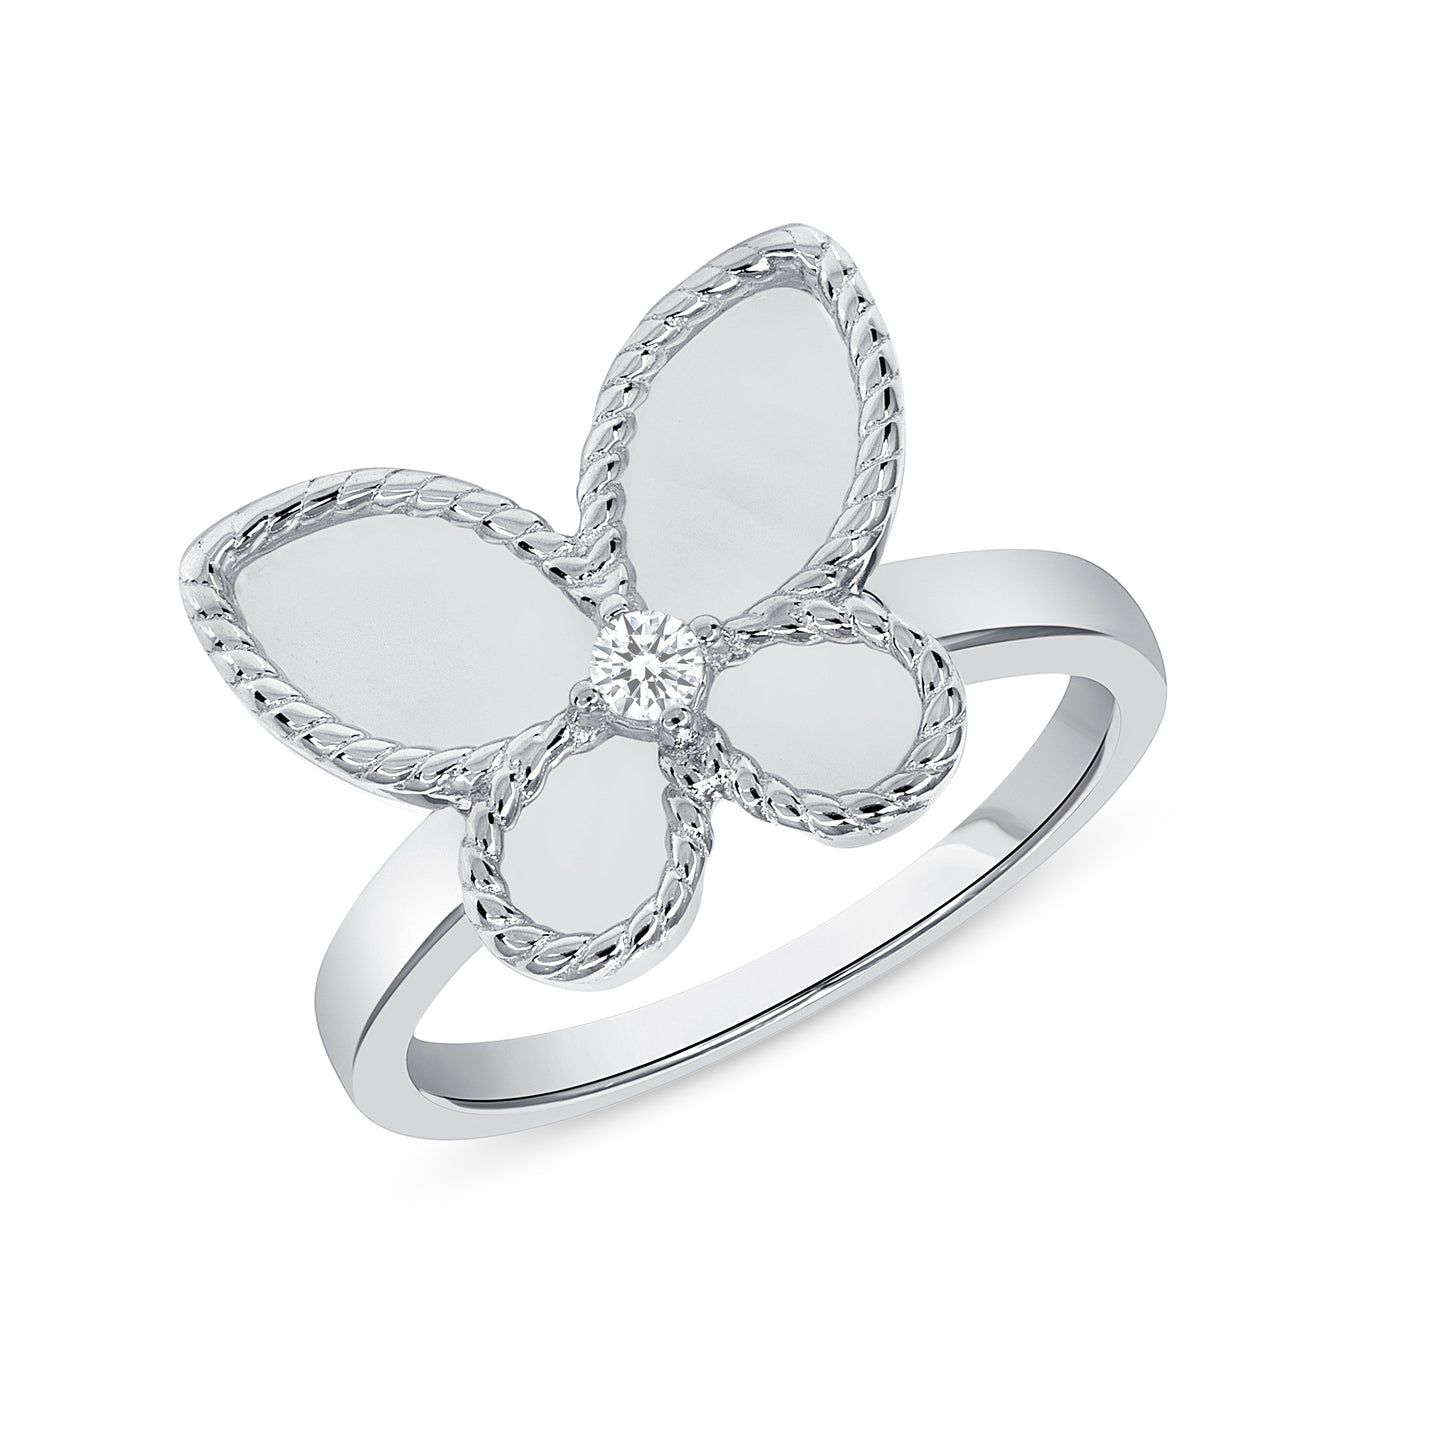 Silver 925 Rhodium Plated Cubic Zirconia Butterfly Ring. DGR2219